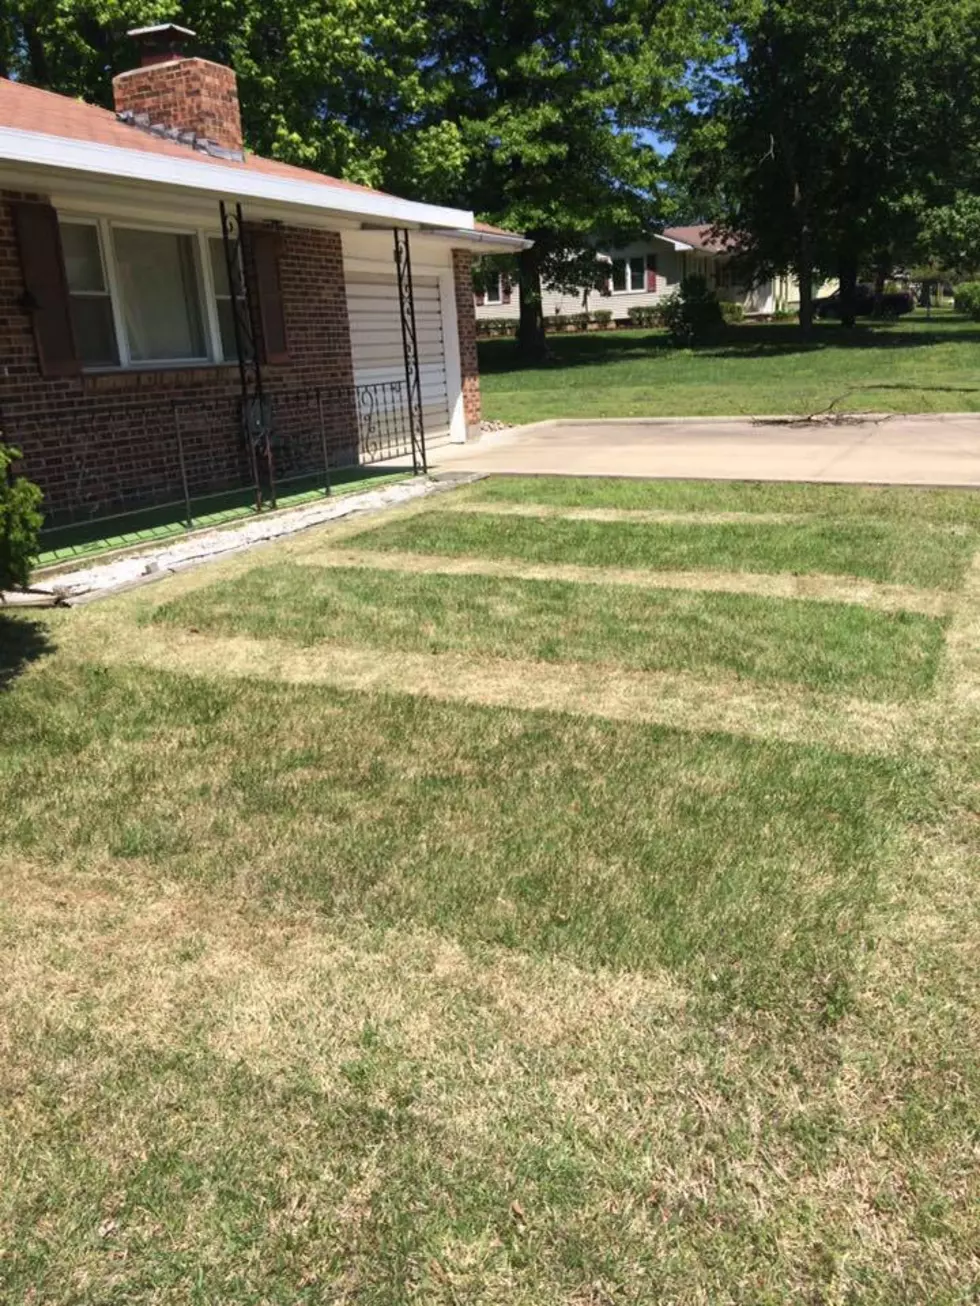 Cole Camp Man Mows His Lawn Like A Football Field